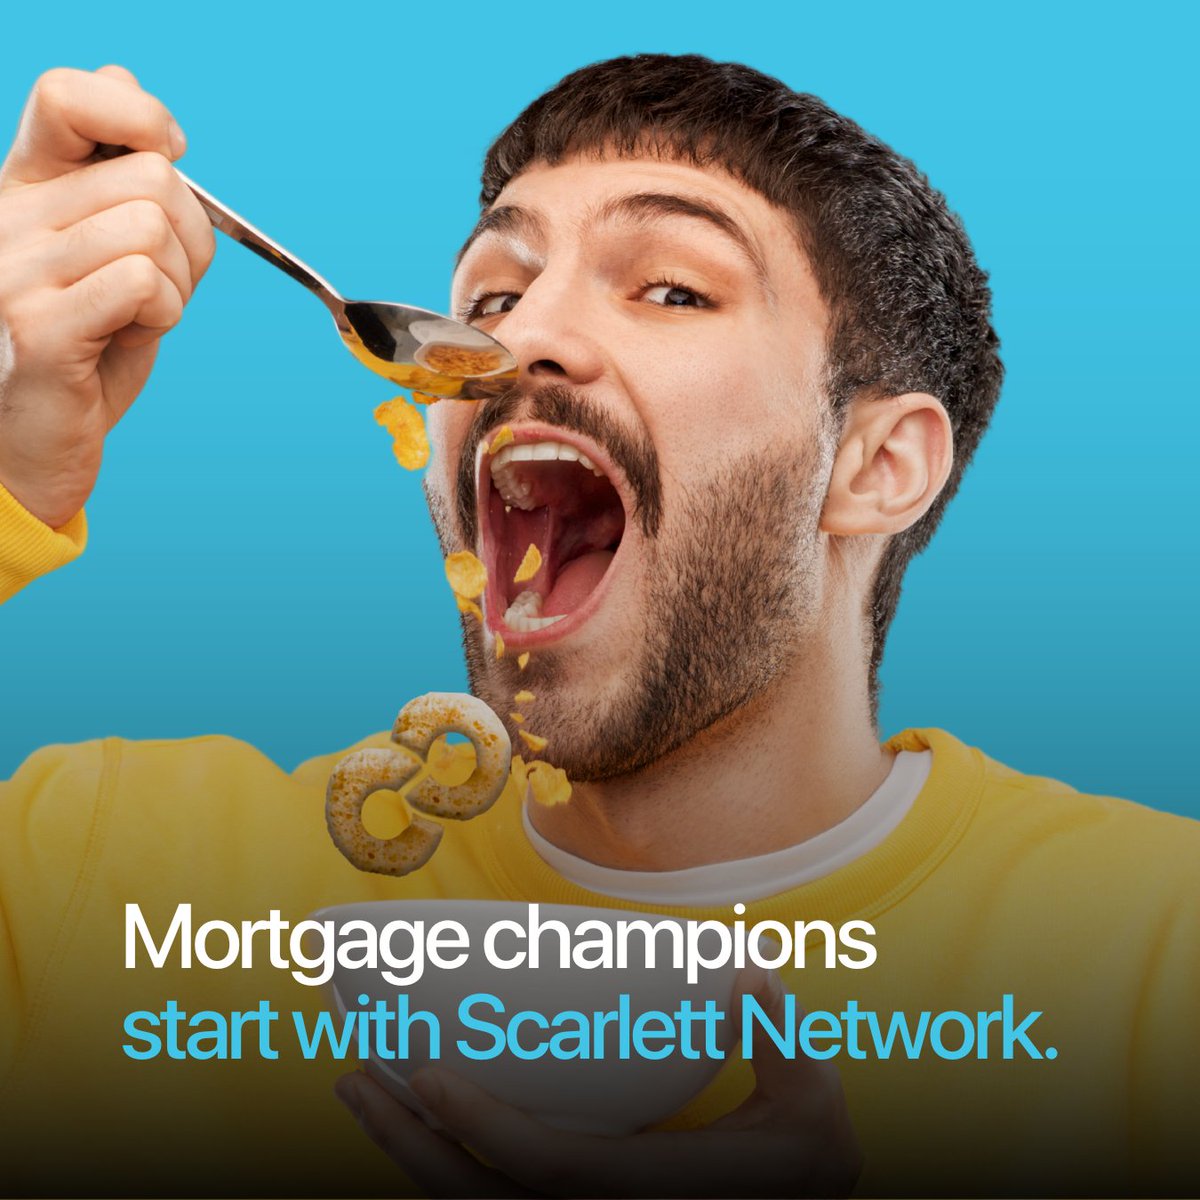 Start your day off right with a breakfast of mortgage champions. From streamlined processes to expert support, we've got everything you need to power through your day and succeed! 

#mortgageagent #mortgages #broker